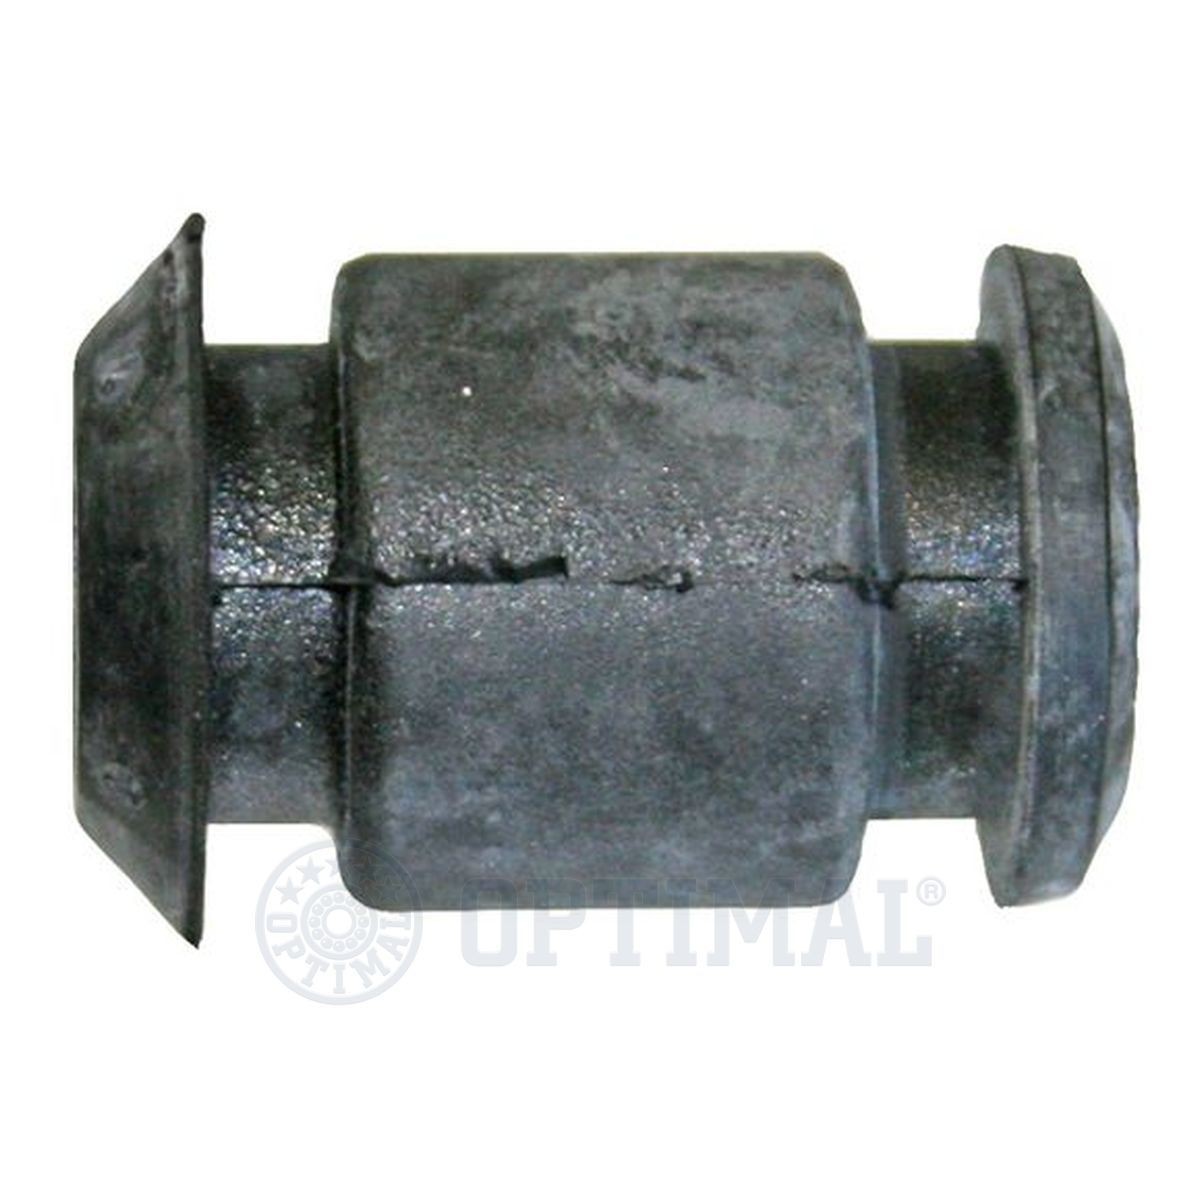 OPTIMAL Centre, Front Axle, both sides Arm Bush F8-6450 buy